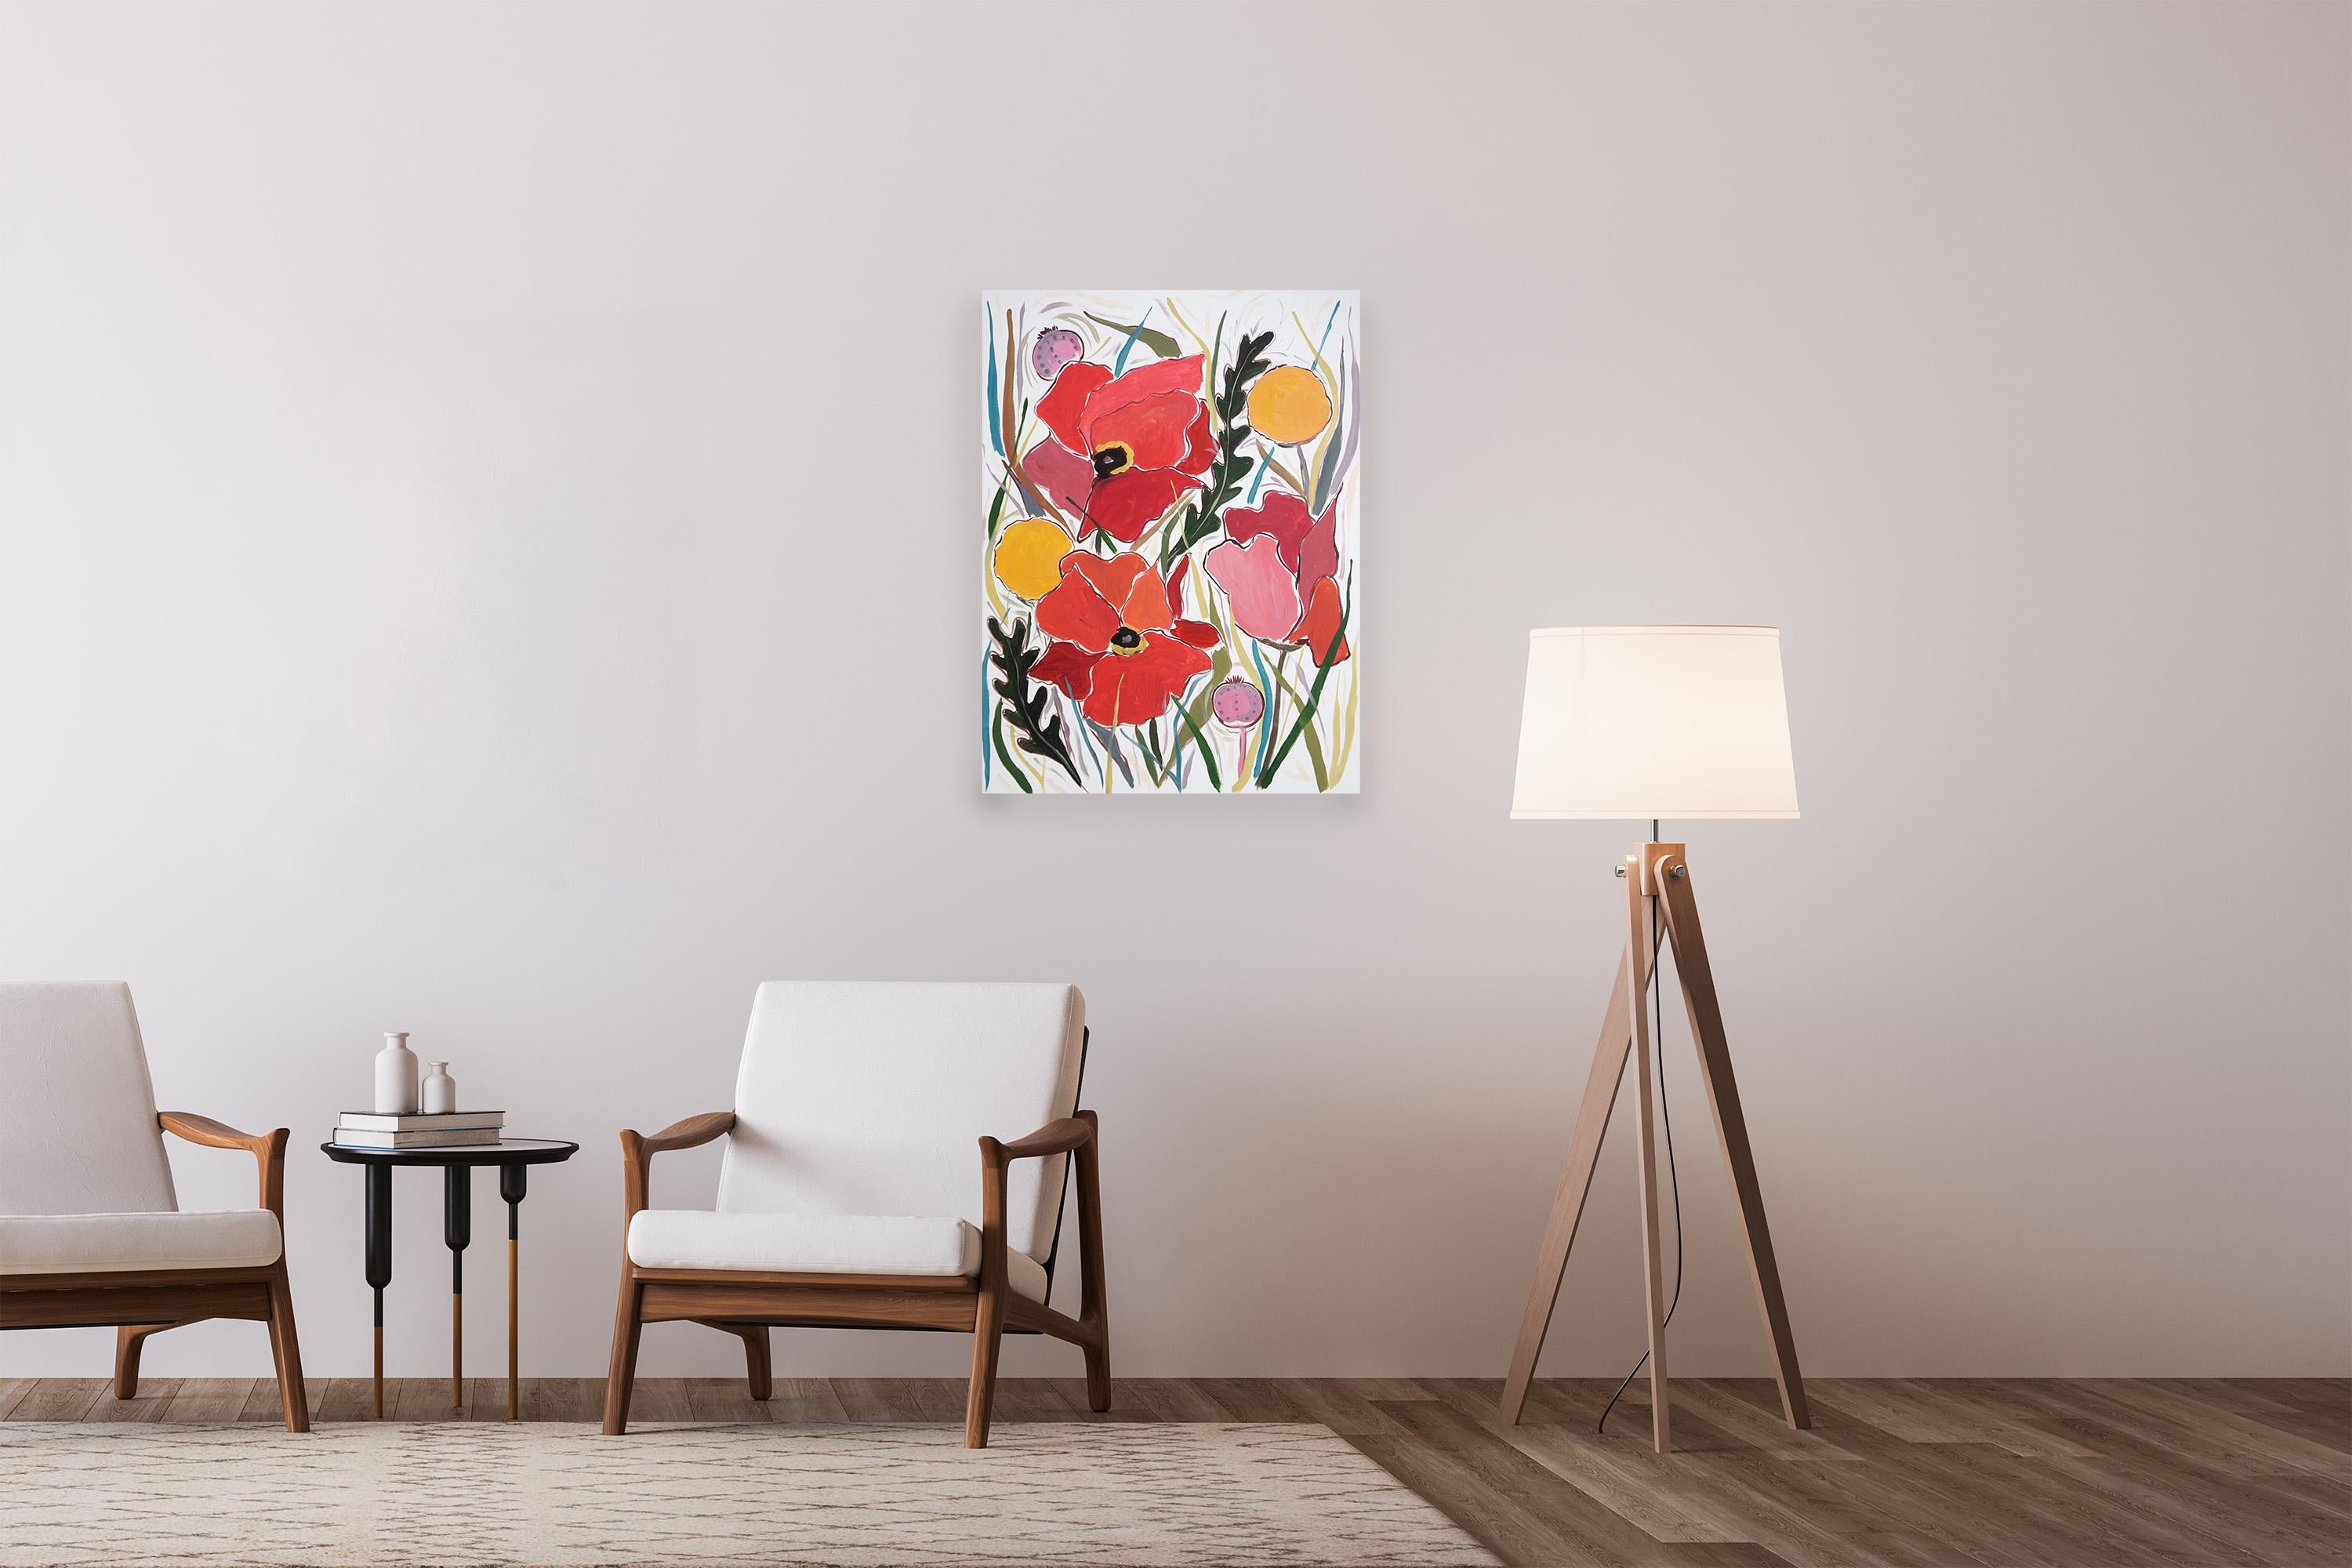 Red Giant Poppies and Yellow Craspedia Flowers on Canvas, Illustration Prairie - Modern Painting by Romina Milano